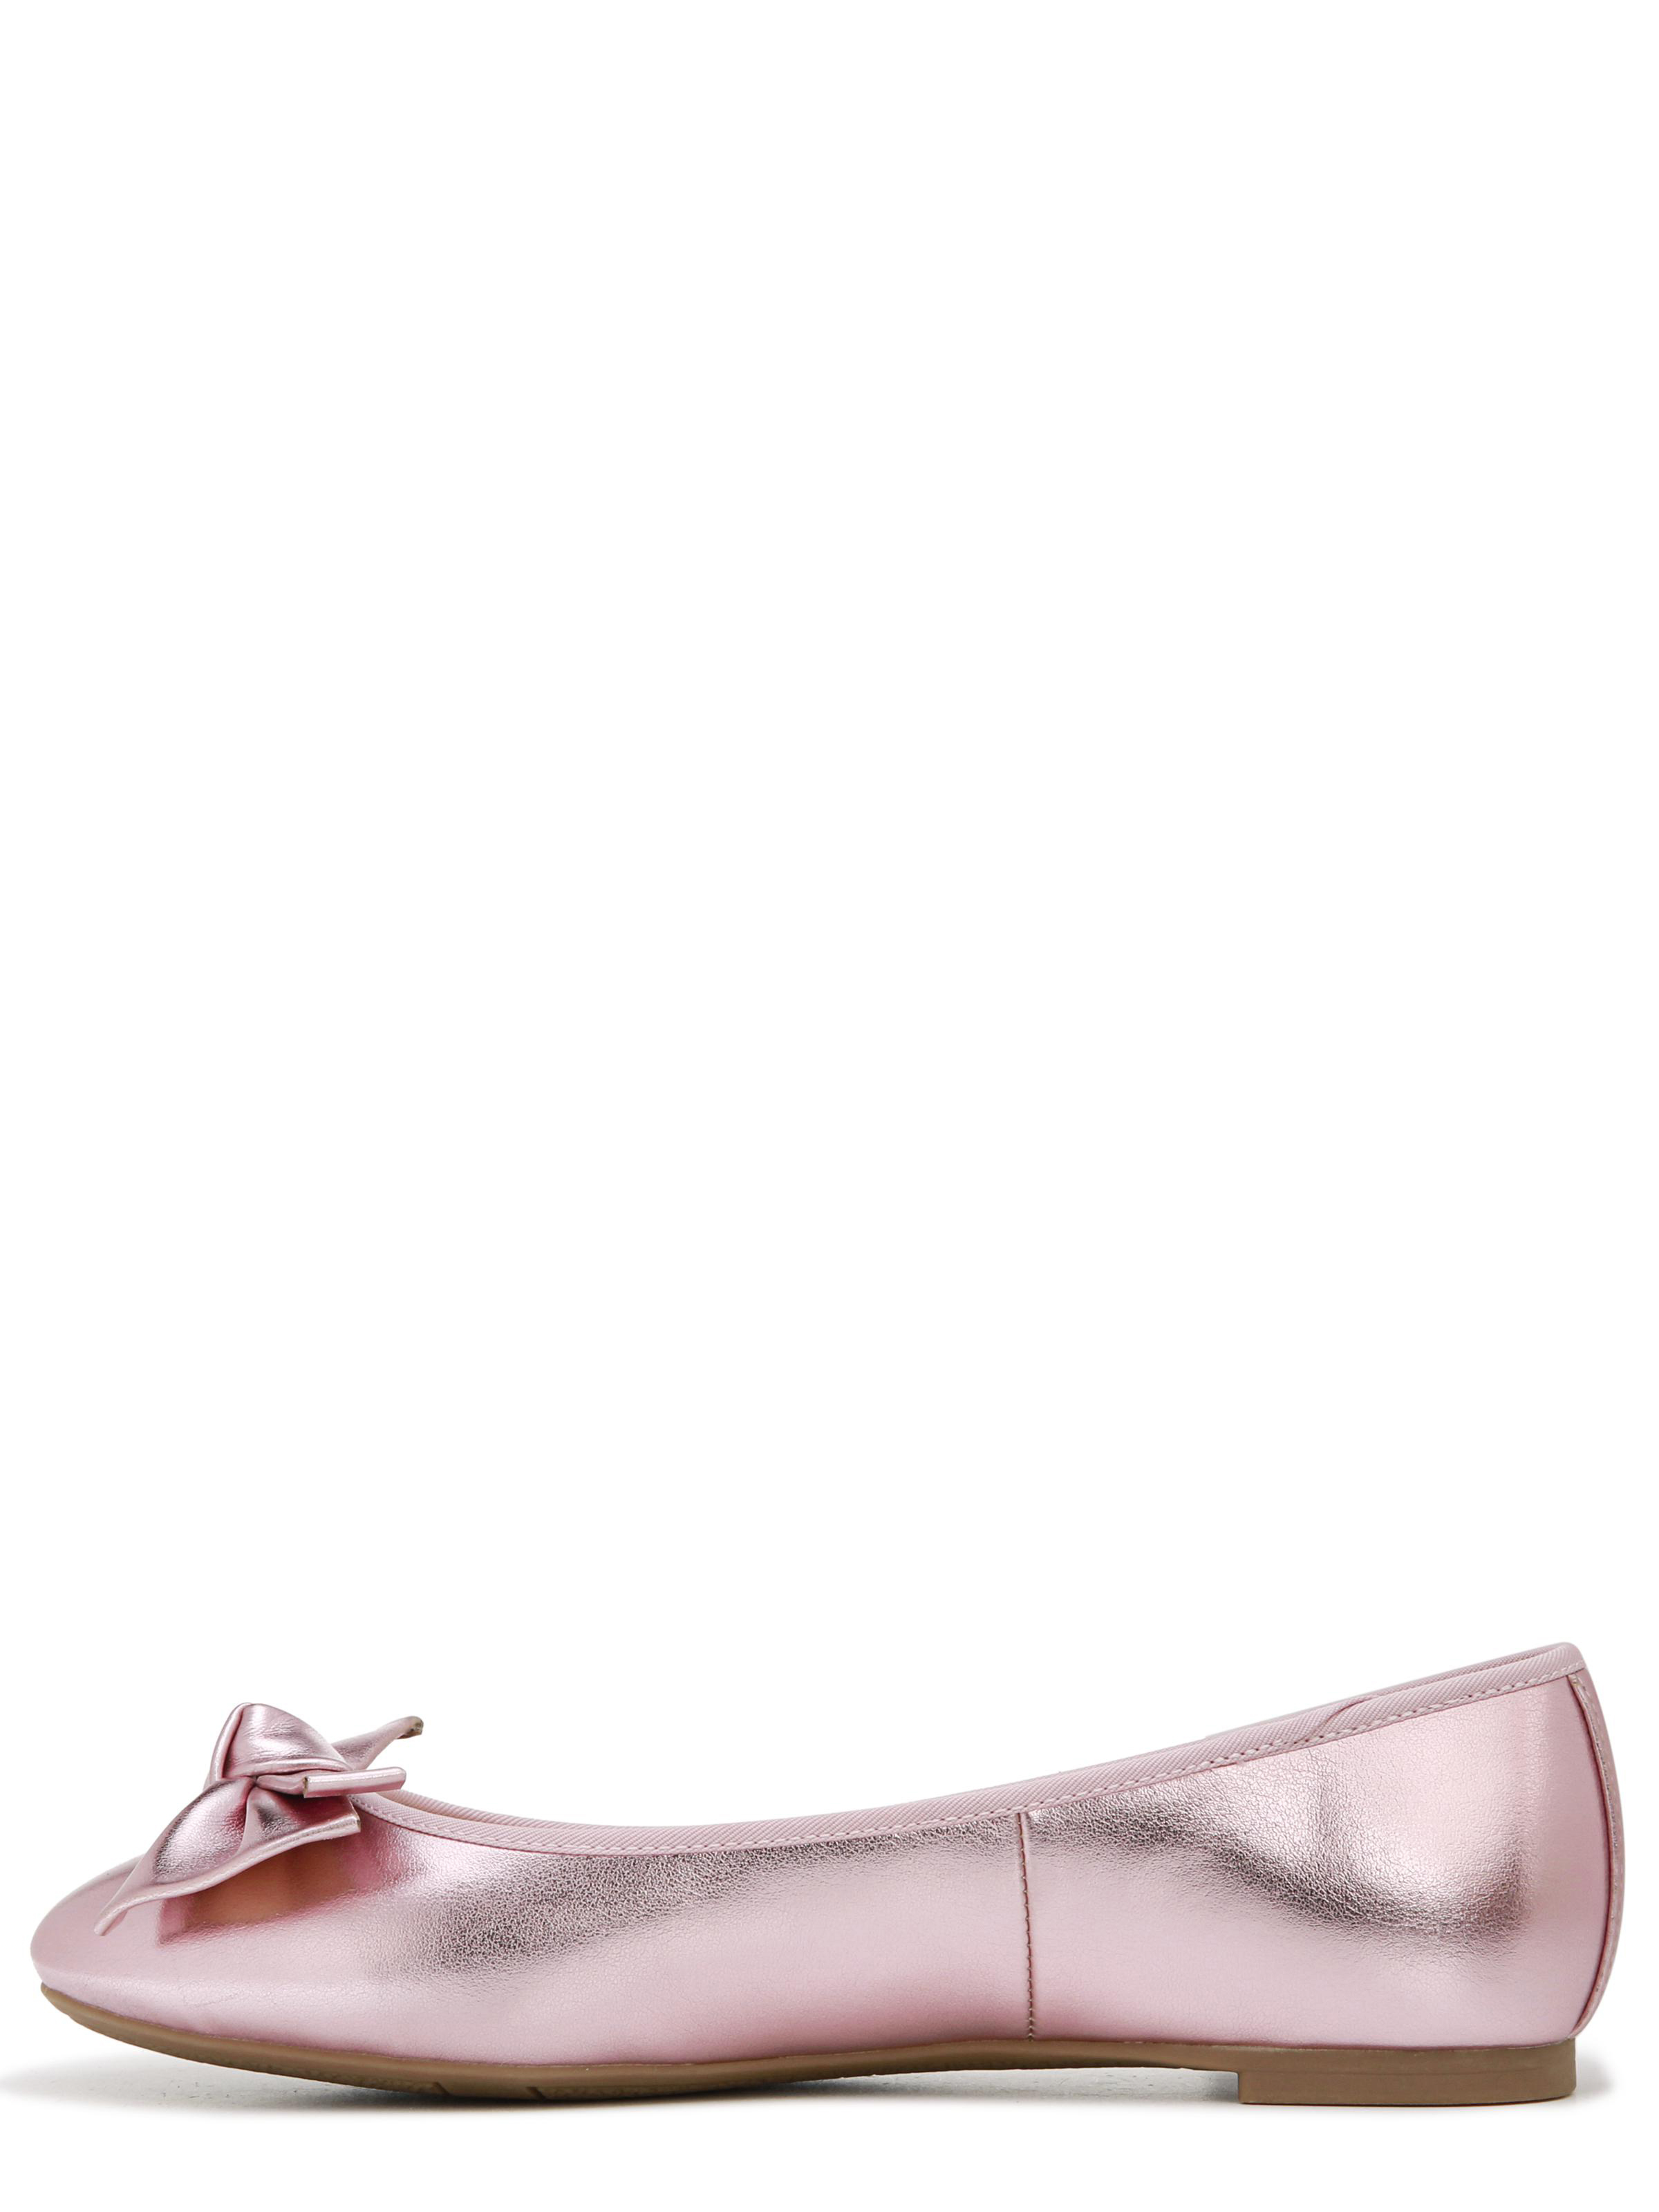 Circus by Sam Edelman Women's Connie Ballet Flat - image 3 of 8